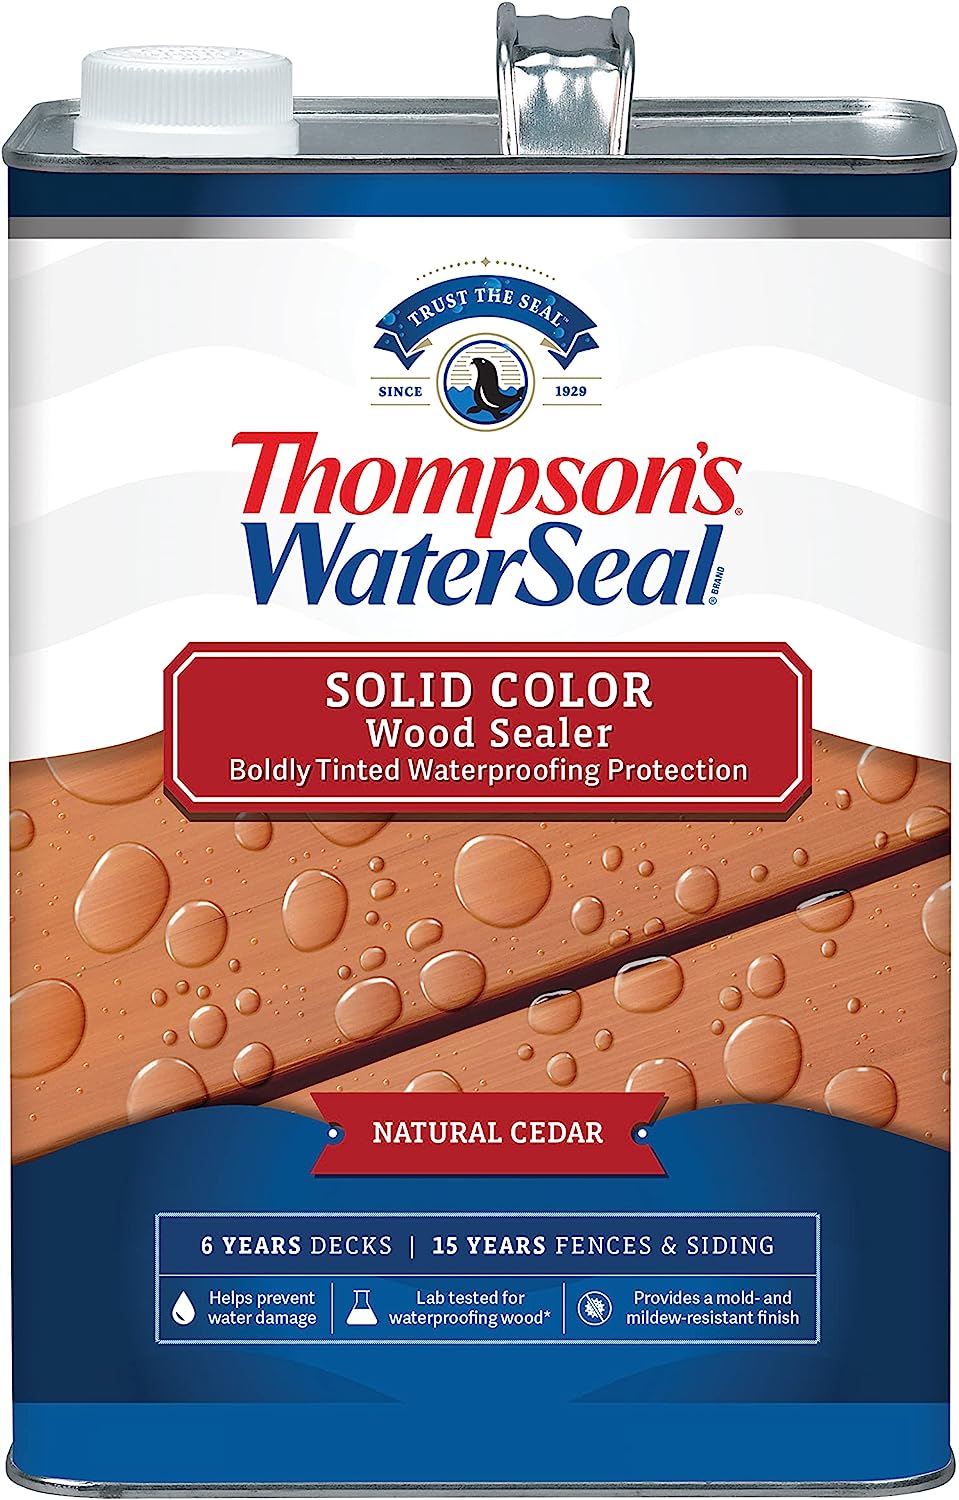 Thompson's Water Seal Thompson's WaterSeal Solid Color [...]